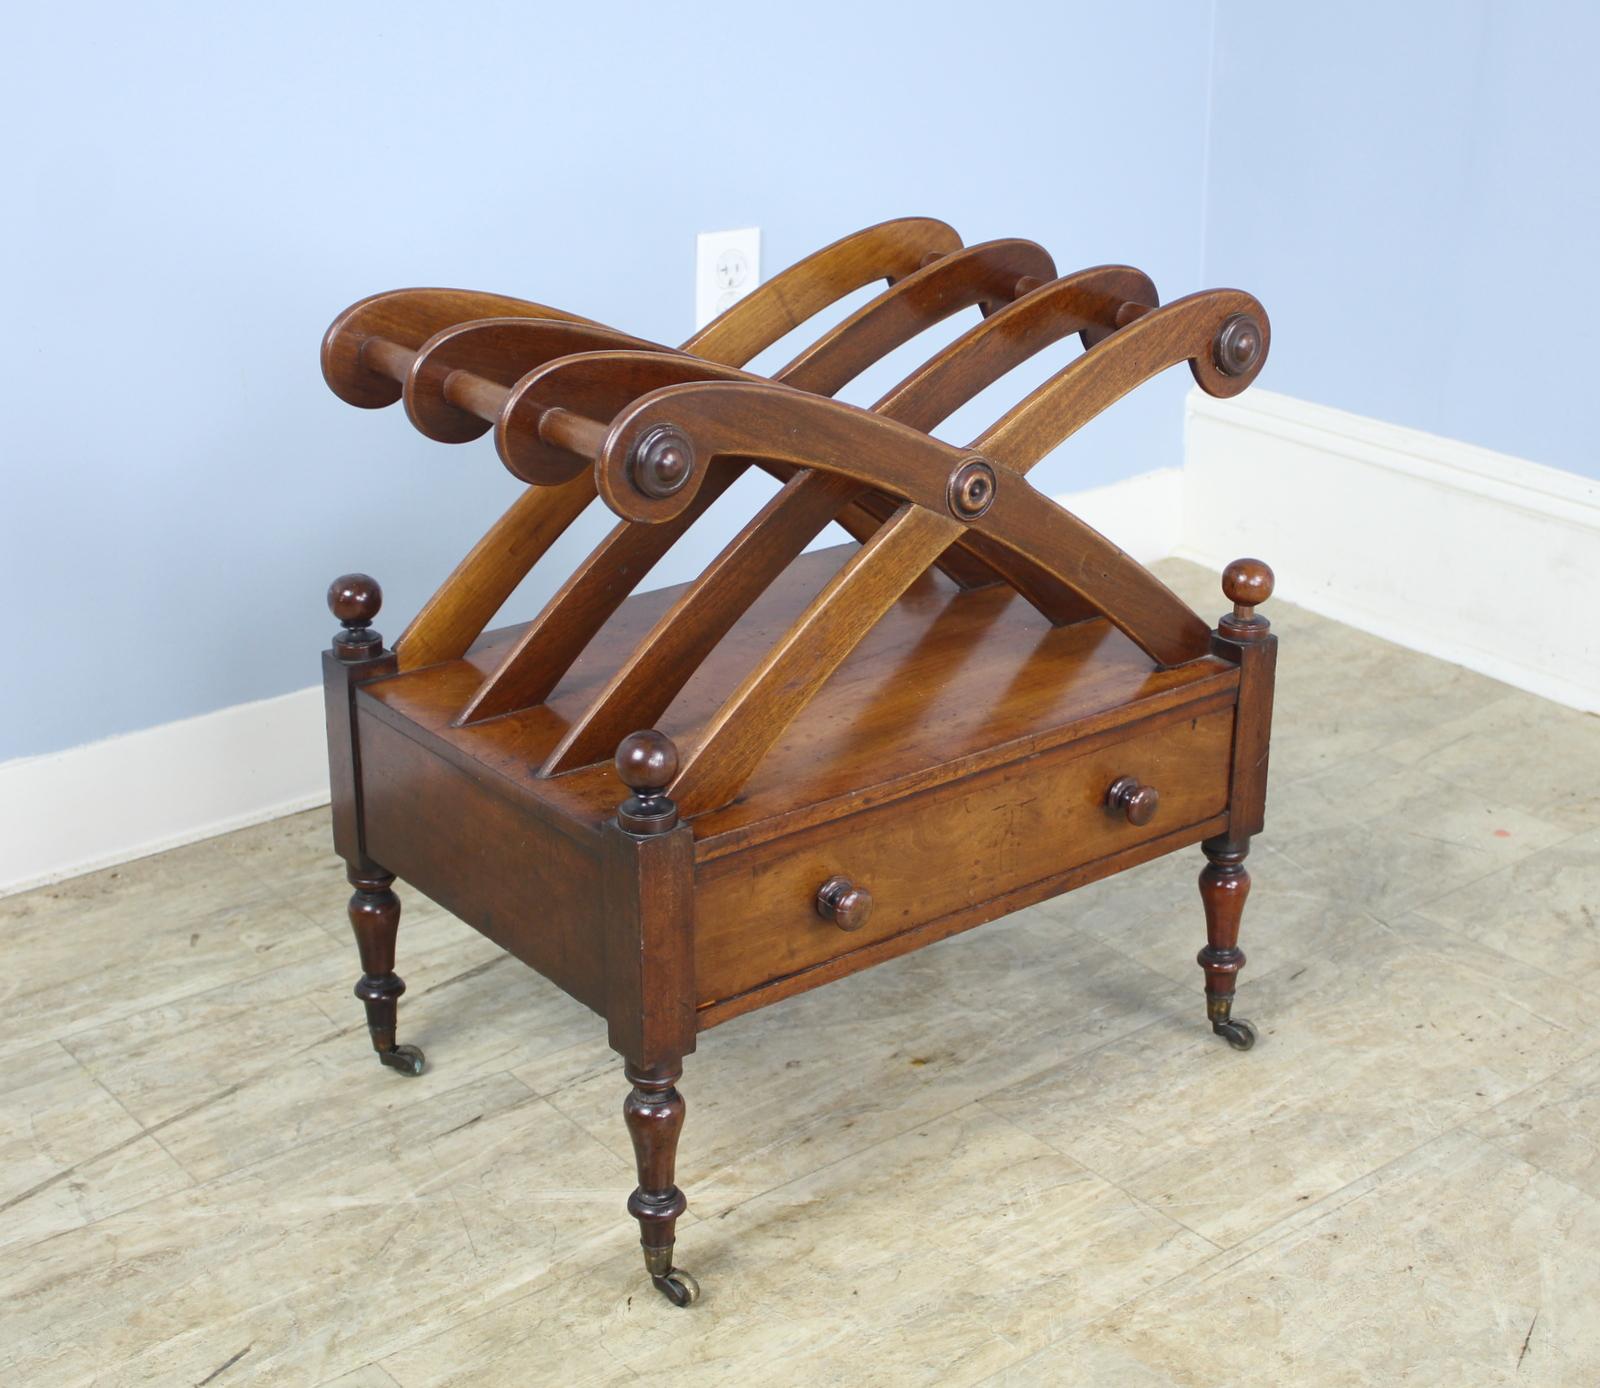 A handsome mahogany canterbury or magazine rack, originally used to organize sheet music. Stylized carved rack with a single drawer in front and shaped legs standing on brass castors.